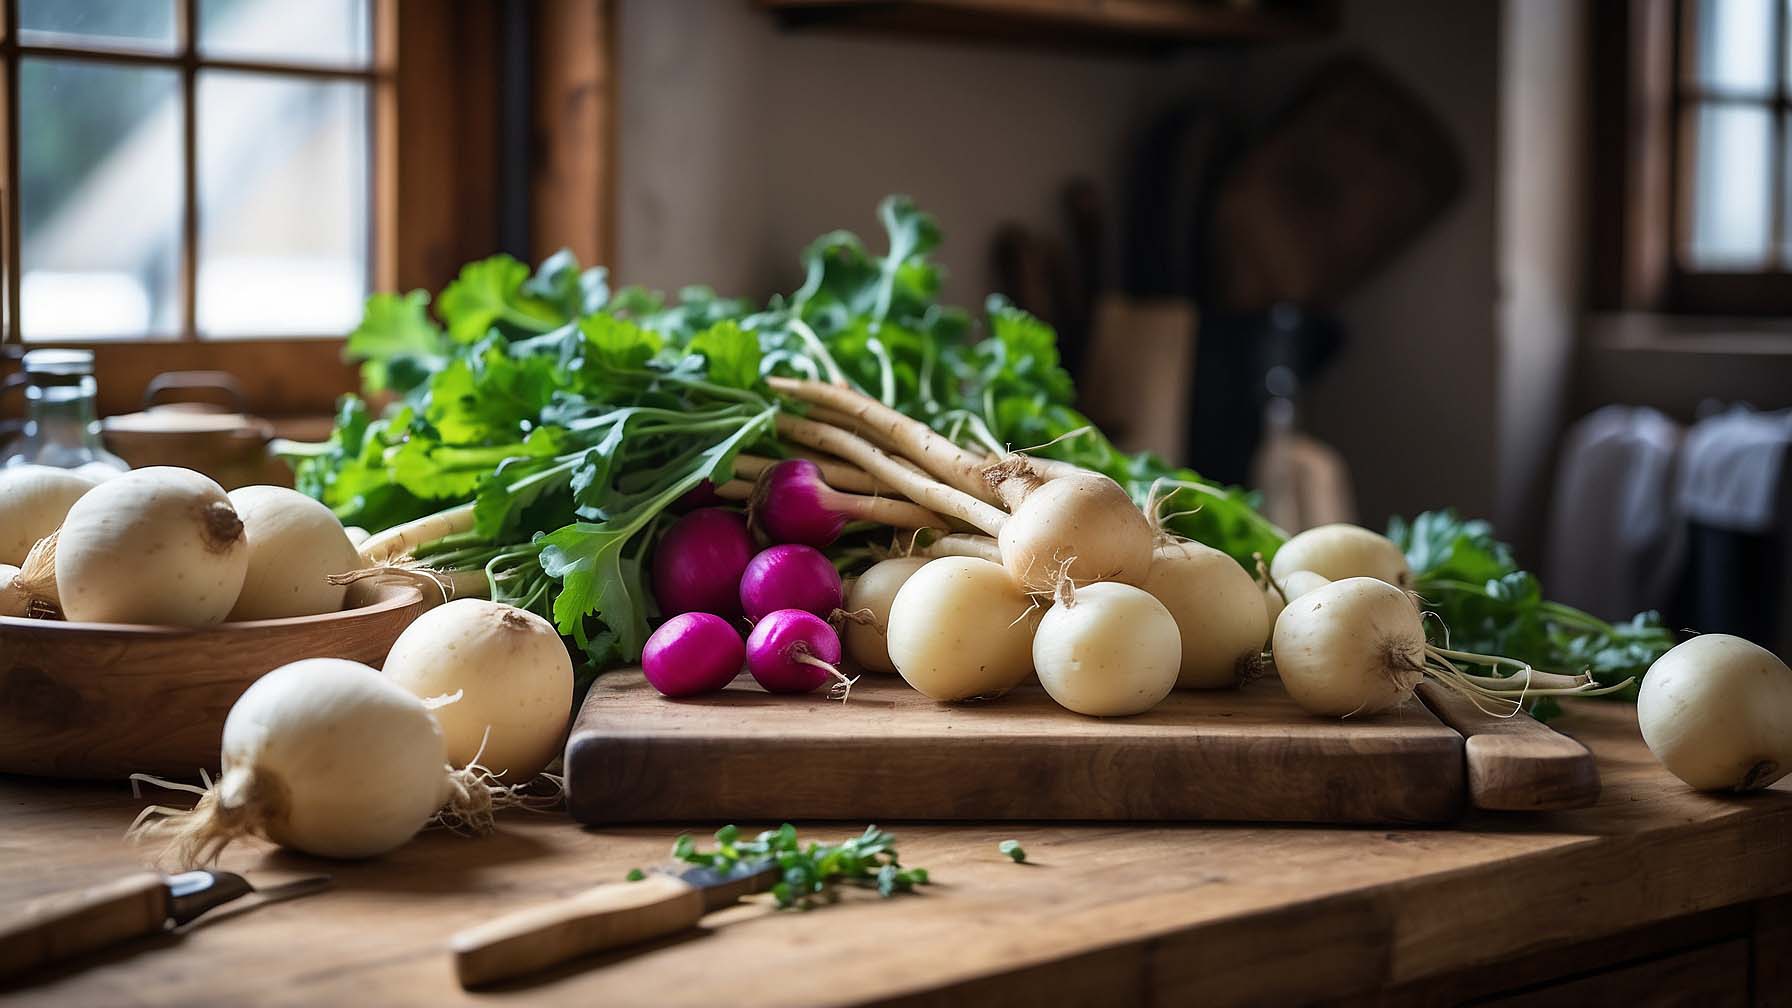 Turnips and Parsnips: A Journey with Root Vegetables